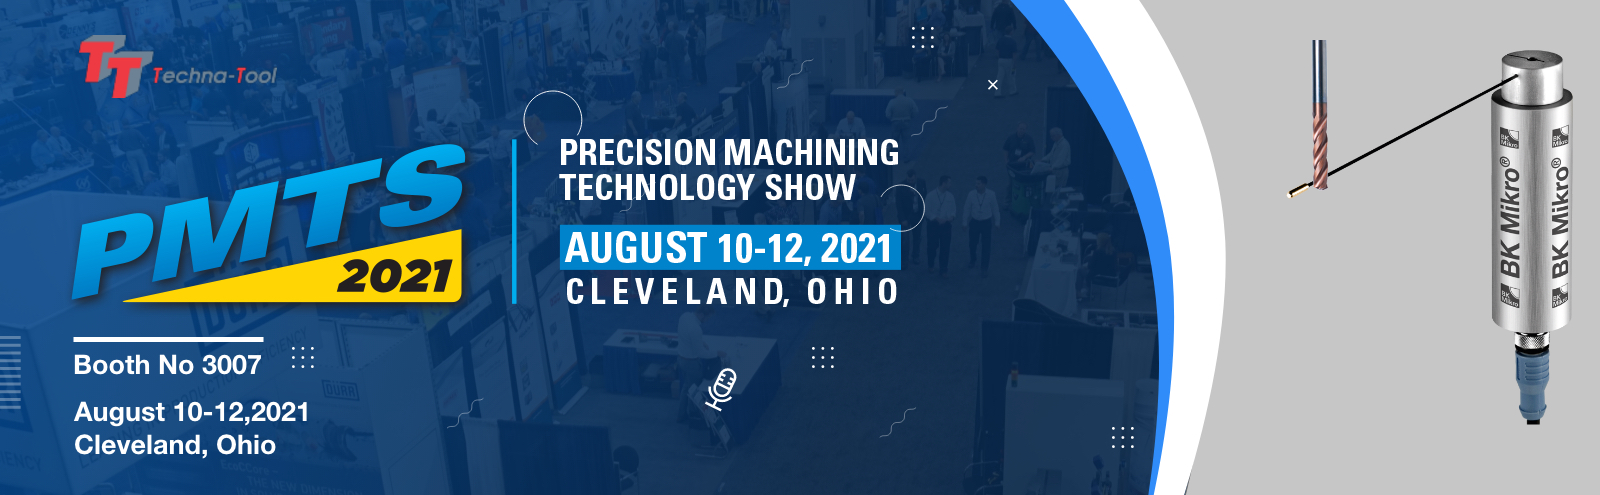 PMTS (Precision Machining Technology) 2021 Show 